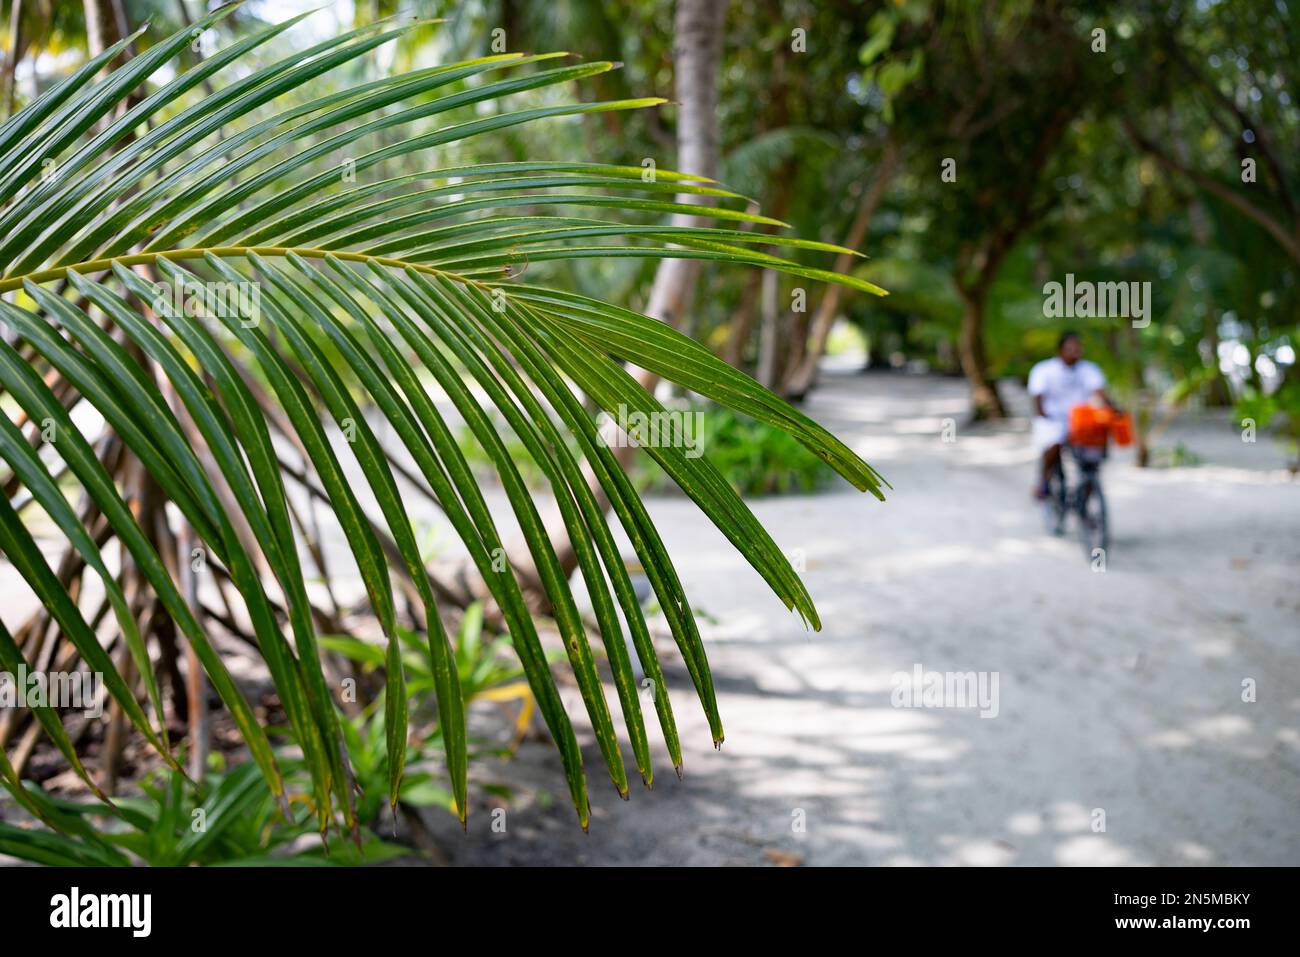 Maldives view - palm leaf and people in the landscape, Rasdhoo atoll, The Maldives tropical Islands, Asia Stock Photo